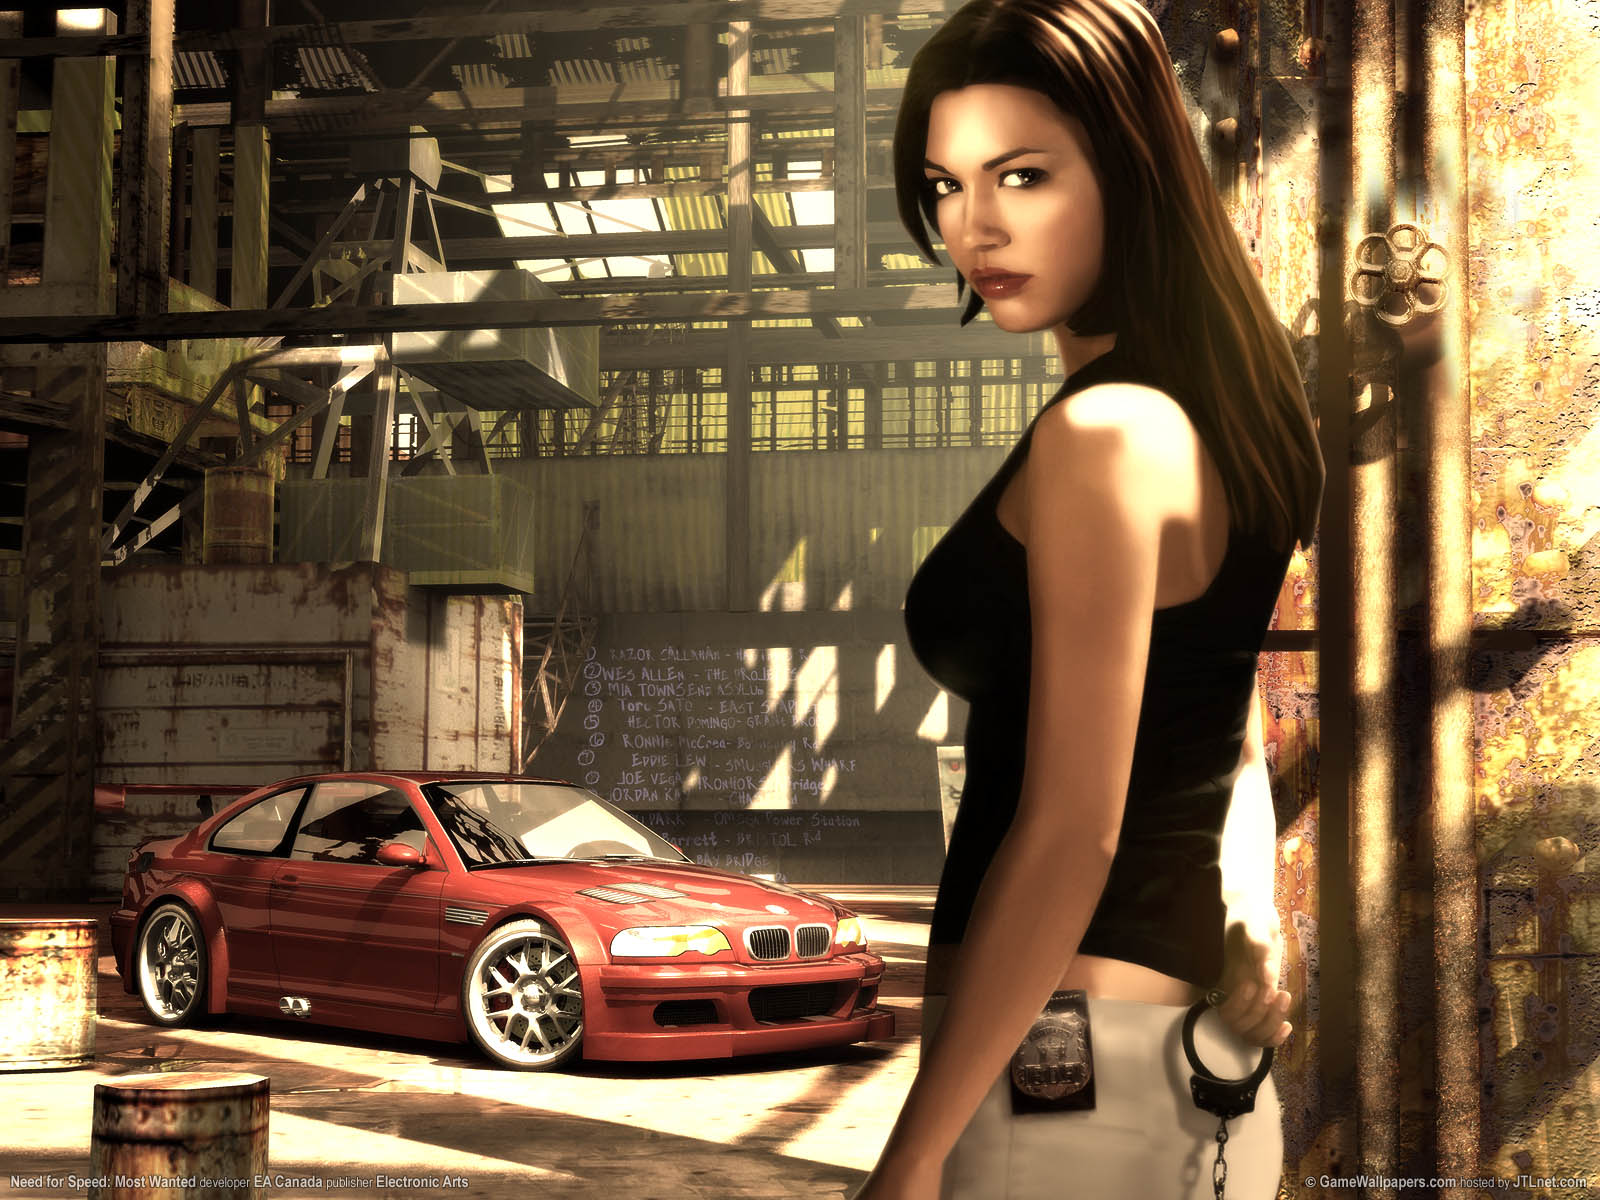 Need for Speed: Most Wanted wallpaper 01 1600x1200